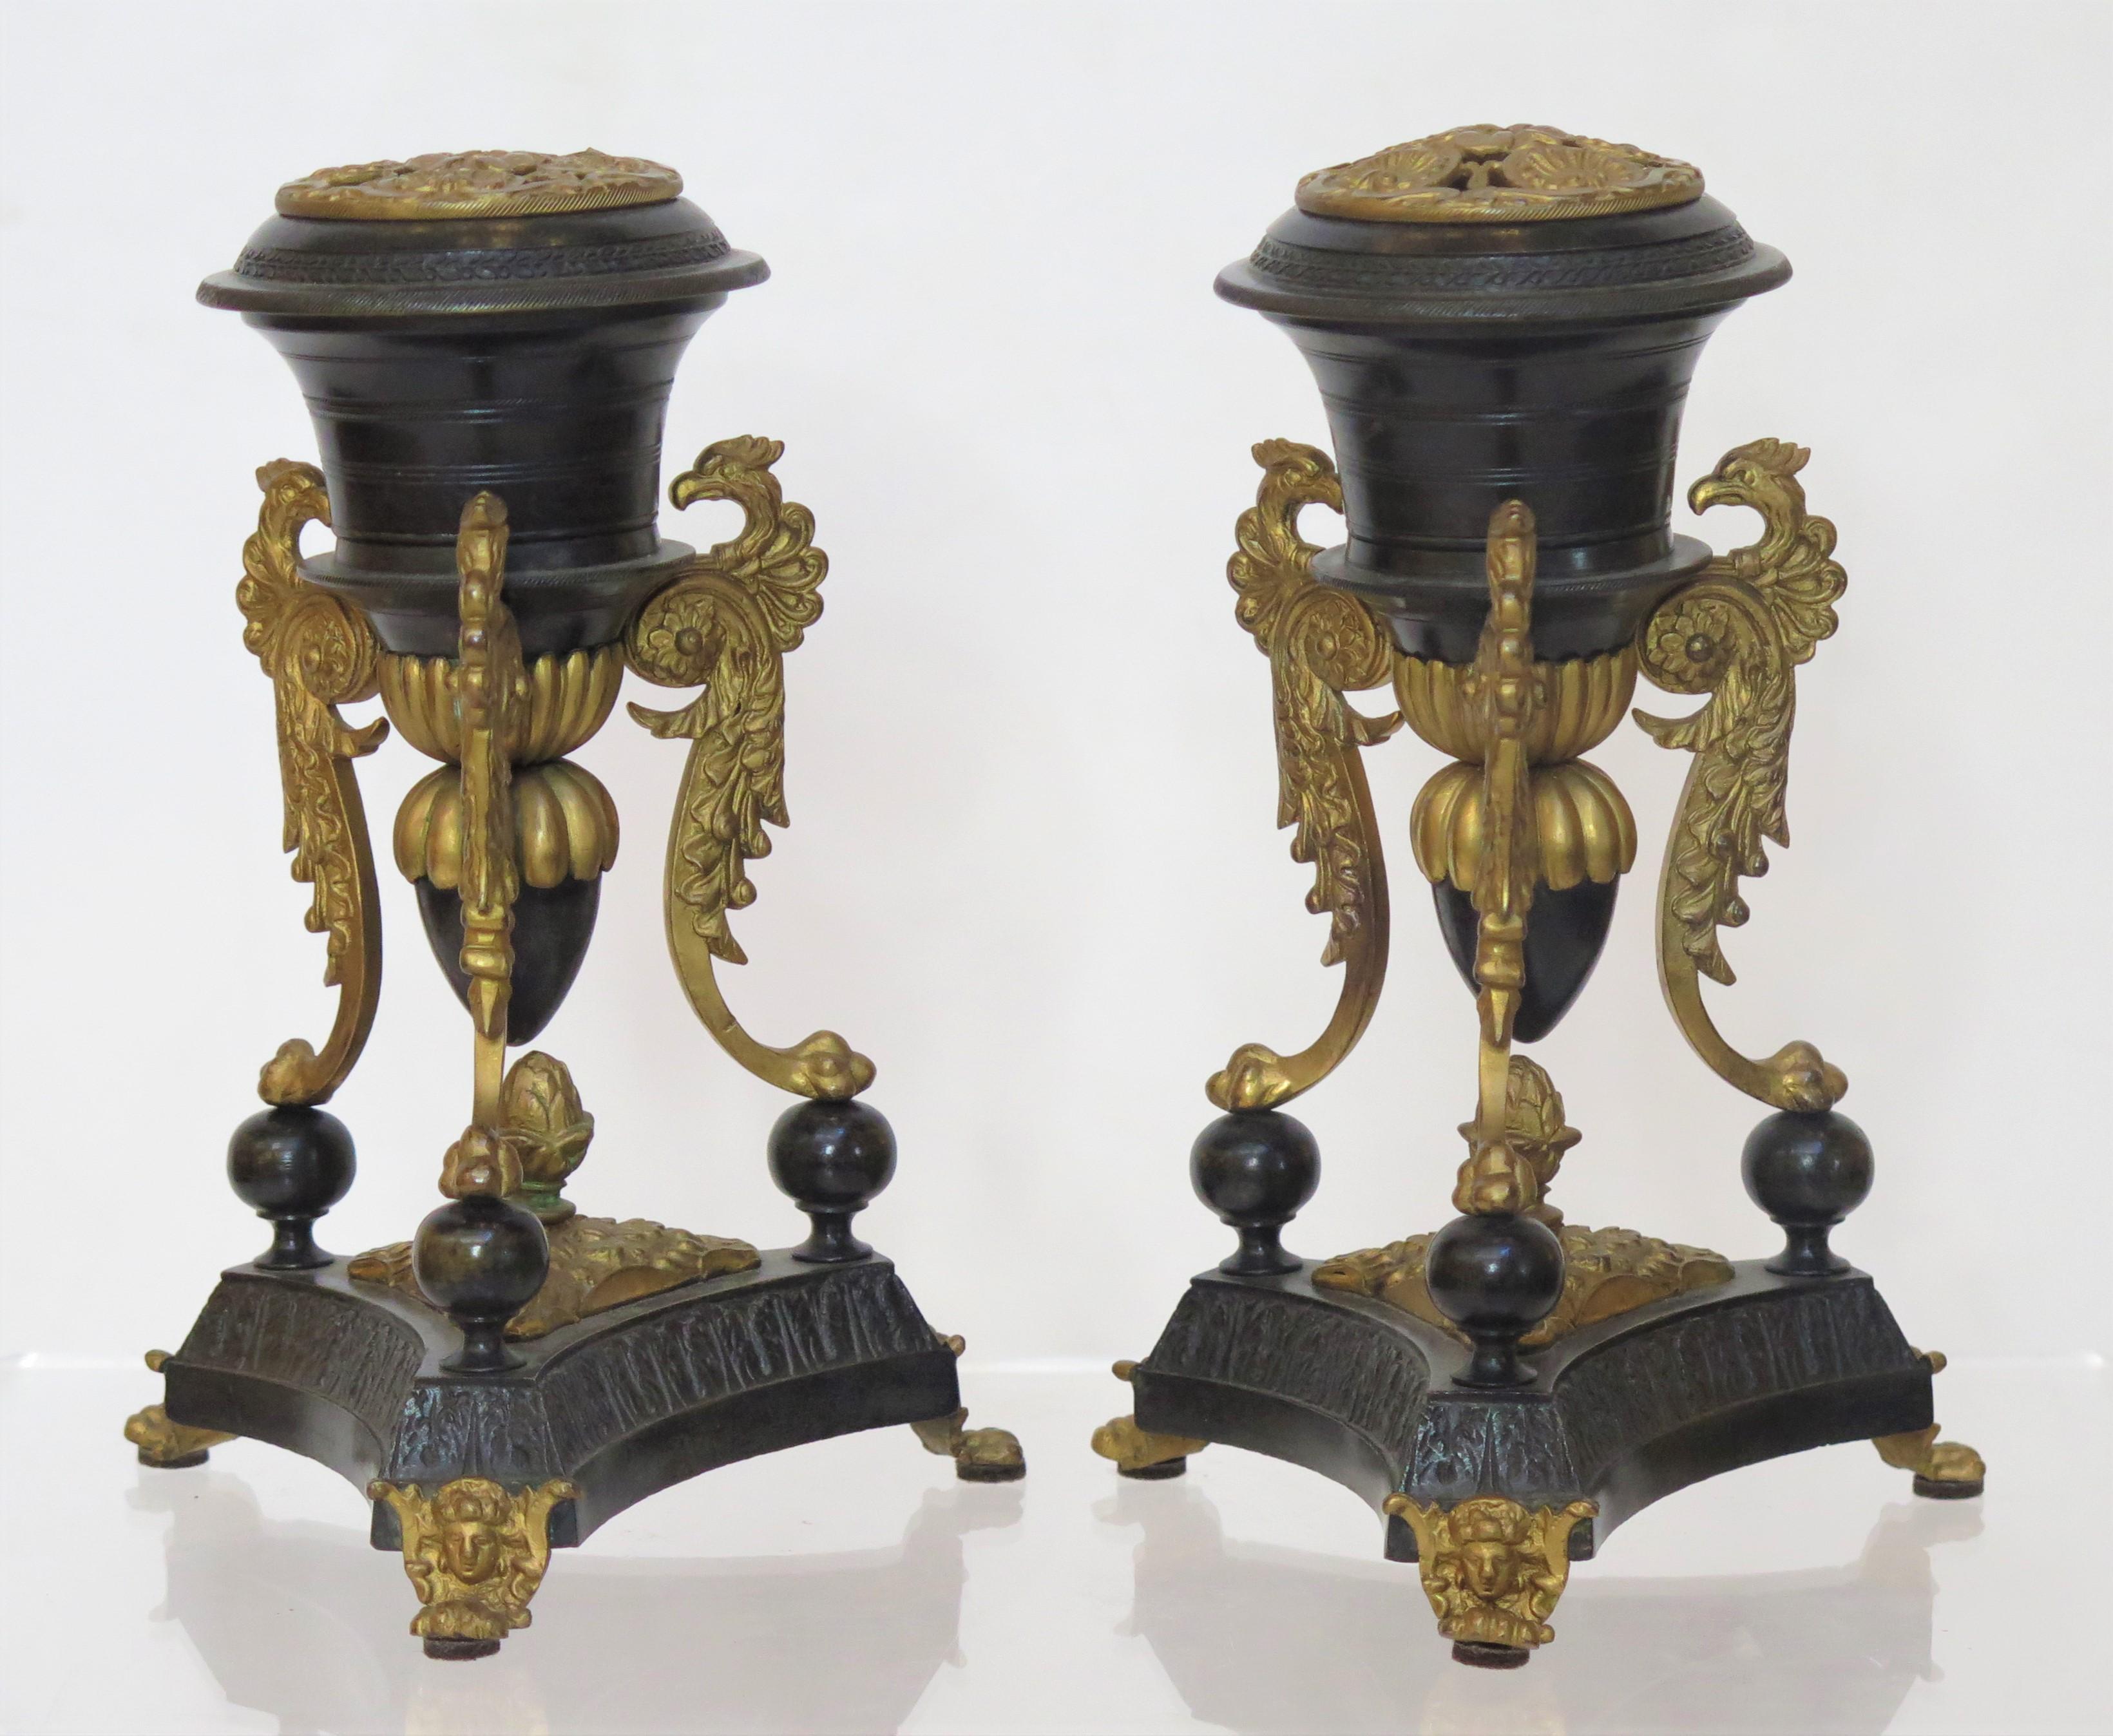 a small scale / petite pair of elegant 19th century French Restoration (1814-1830) patinated and gilt bronze brule-parfums / cassolettes / censer (incense burner), triangular tripod base with gilt feet below classical masks / faces, urn shaped